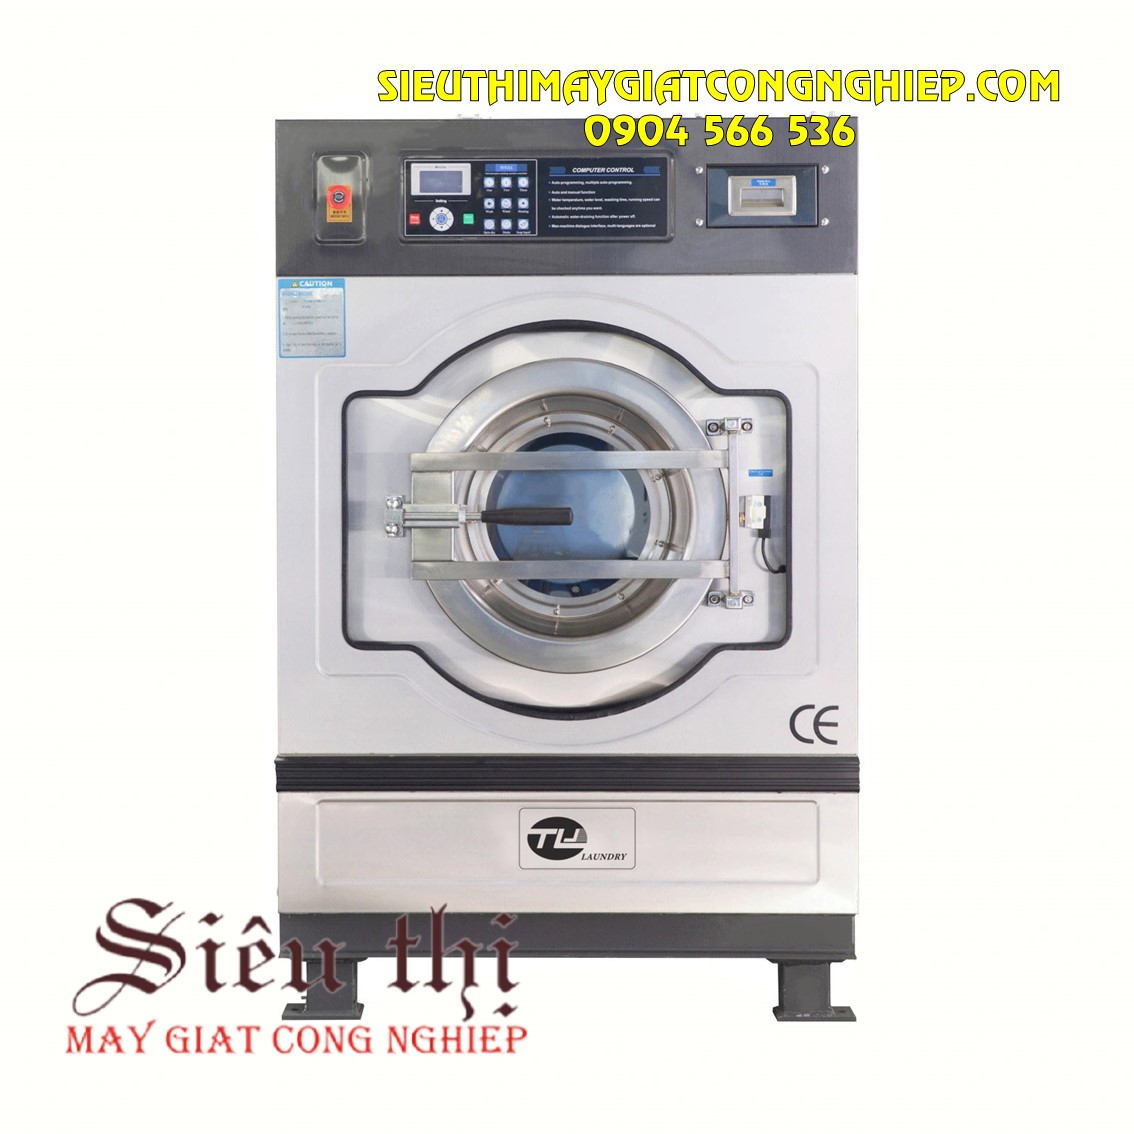 May-Giat-Cong-Nghiep-25kg-TLJ-Laundry-TLJ-FW25S